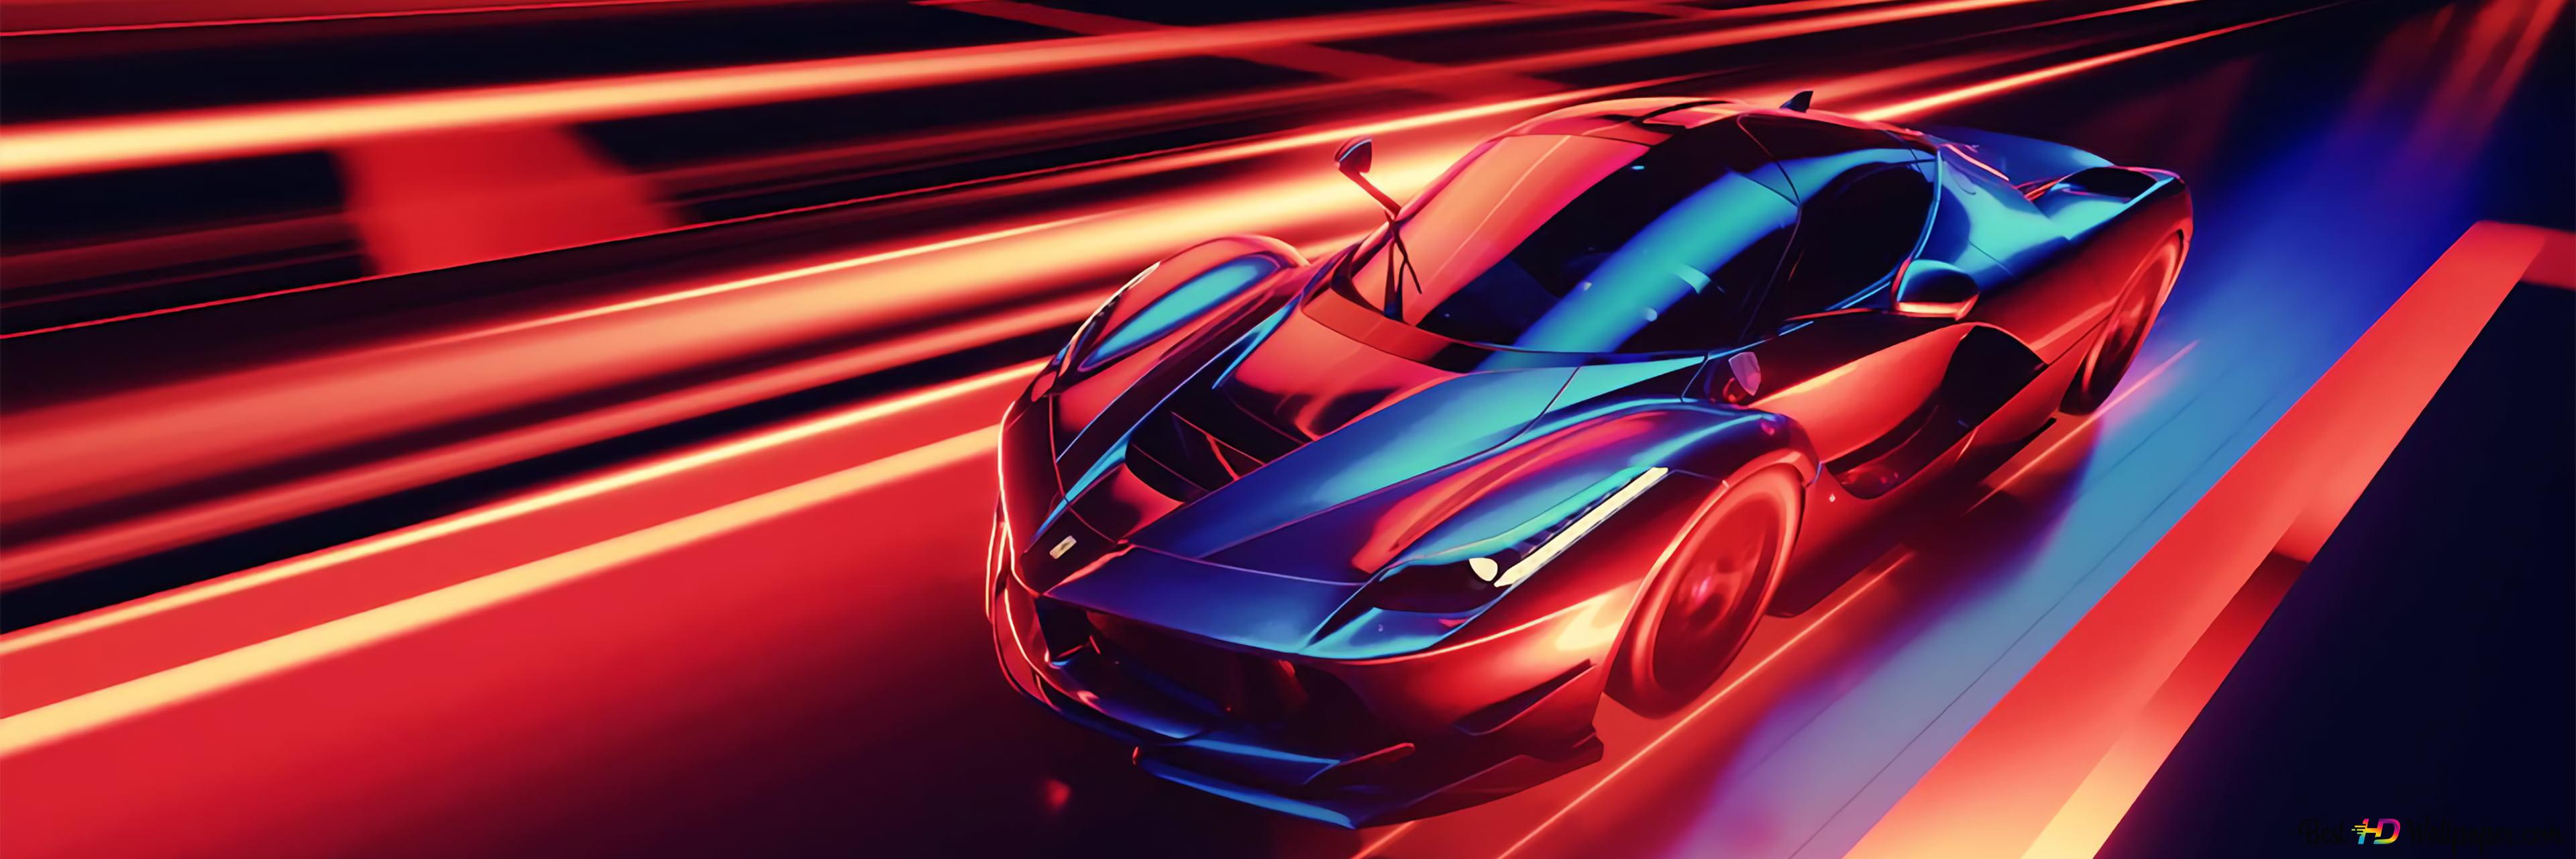 The striking design of Ferrari in neon lights in a colorful environment 4K wallpaper download